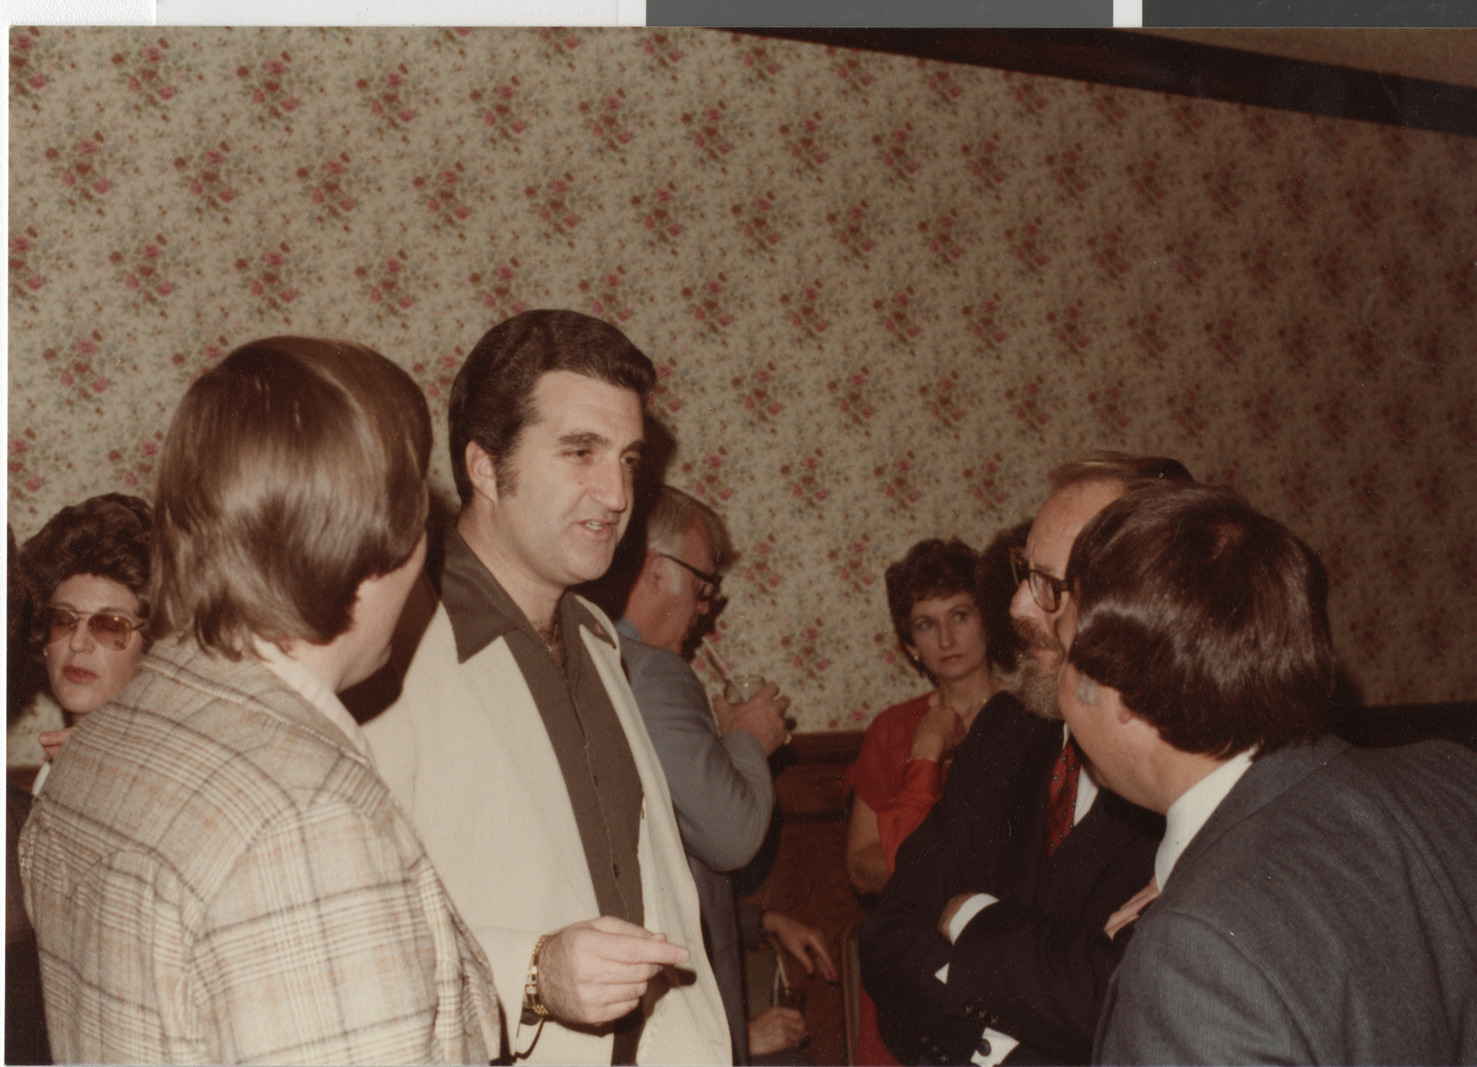 Photograph of Ron Lurie speaking with a group of men